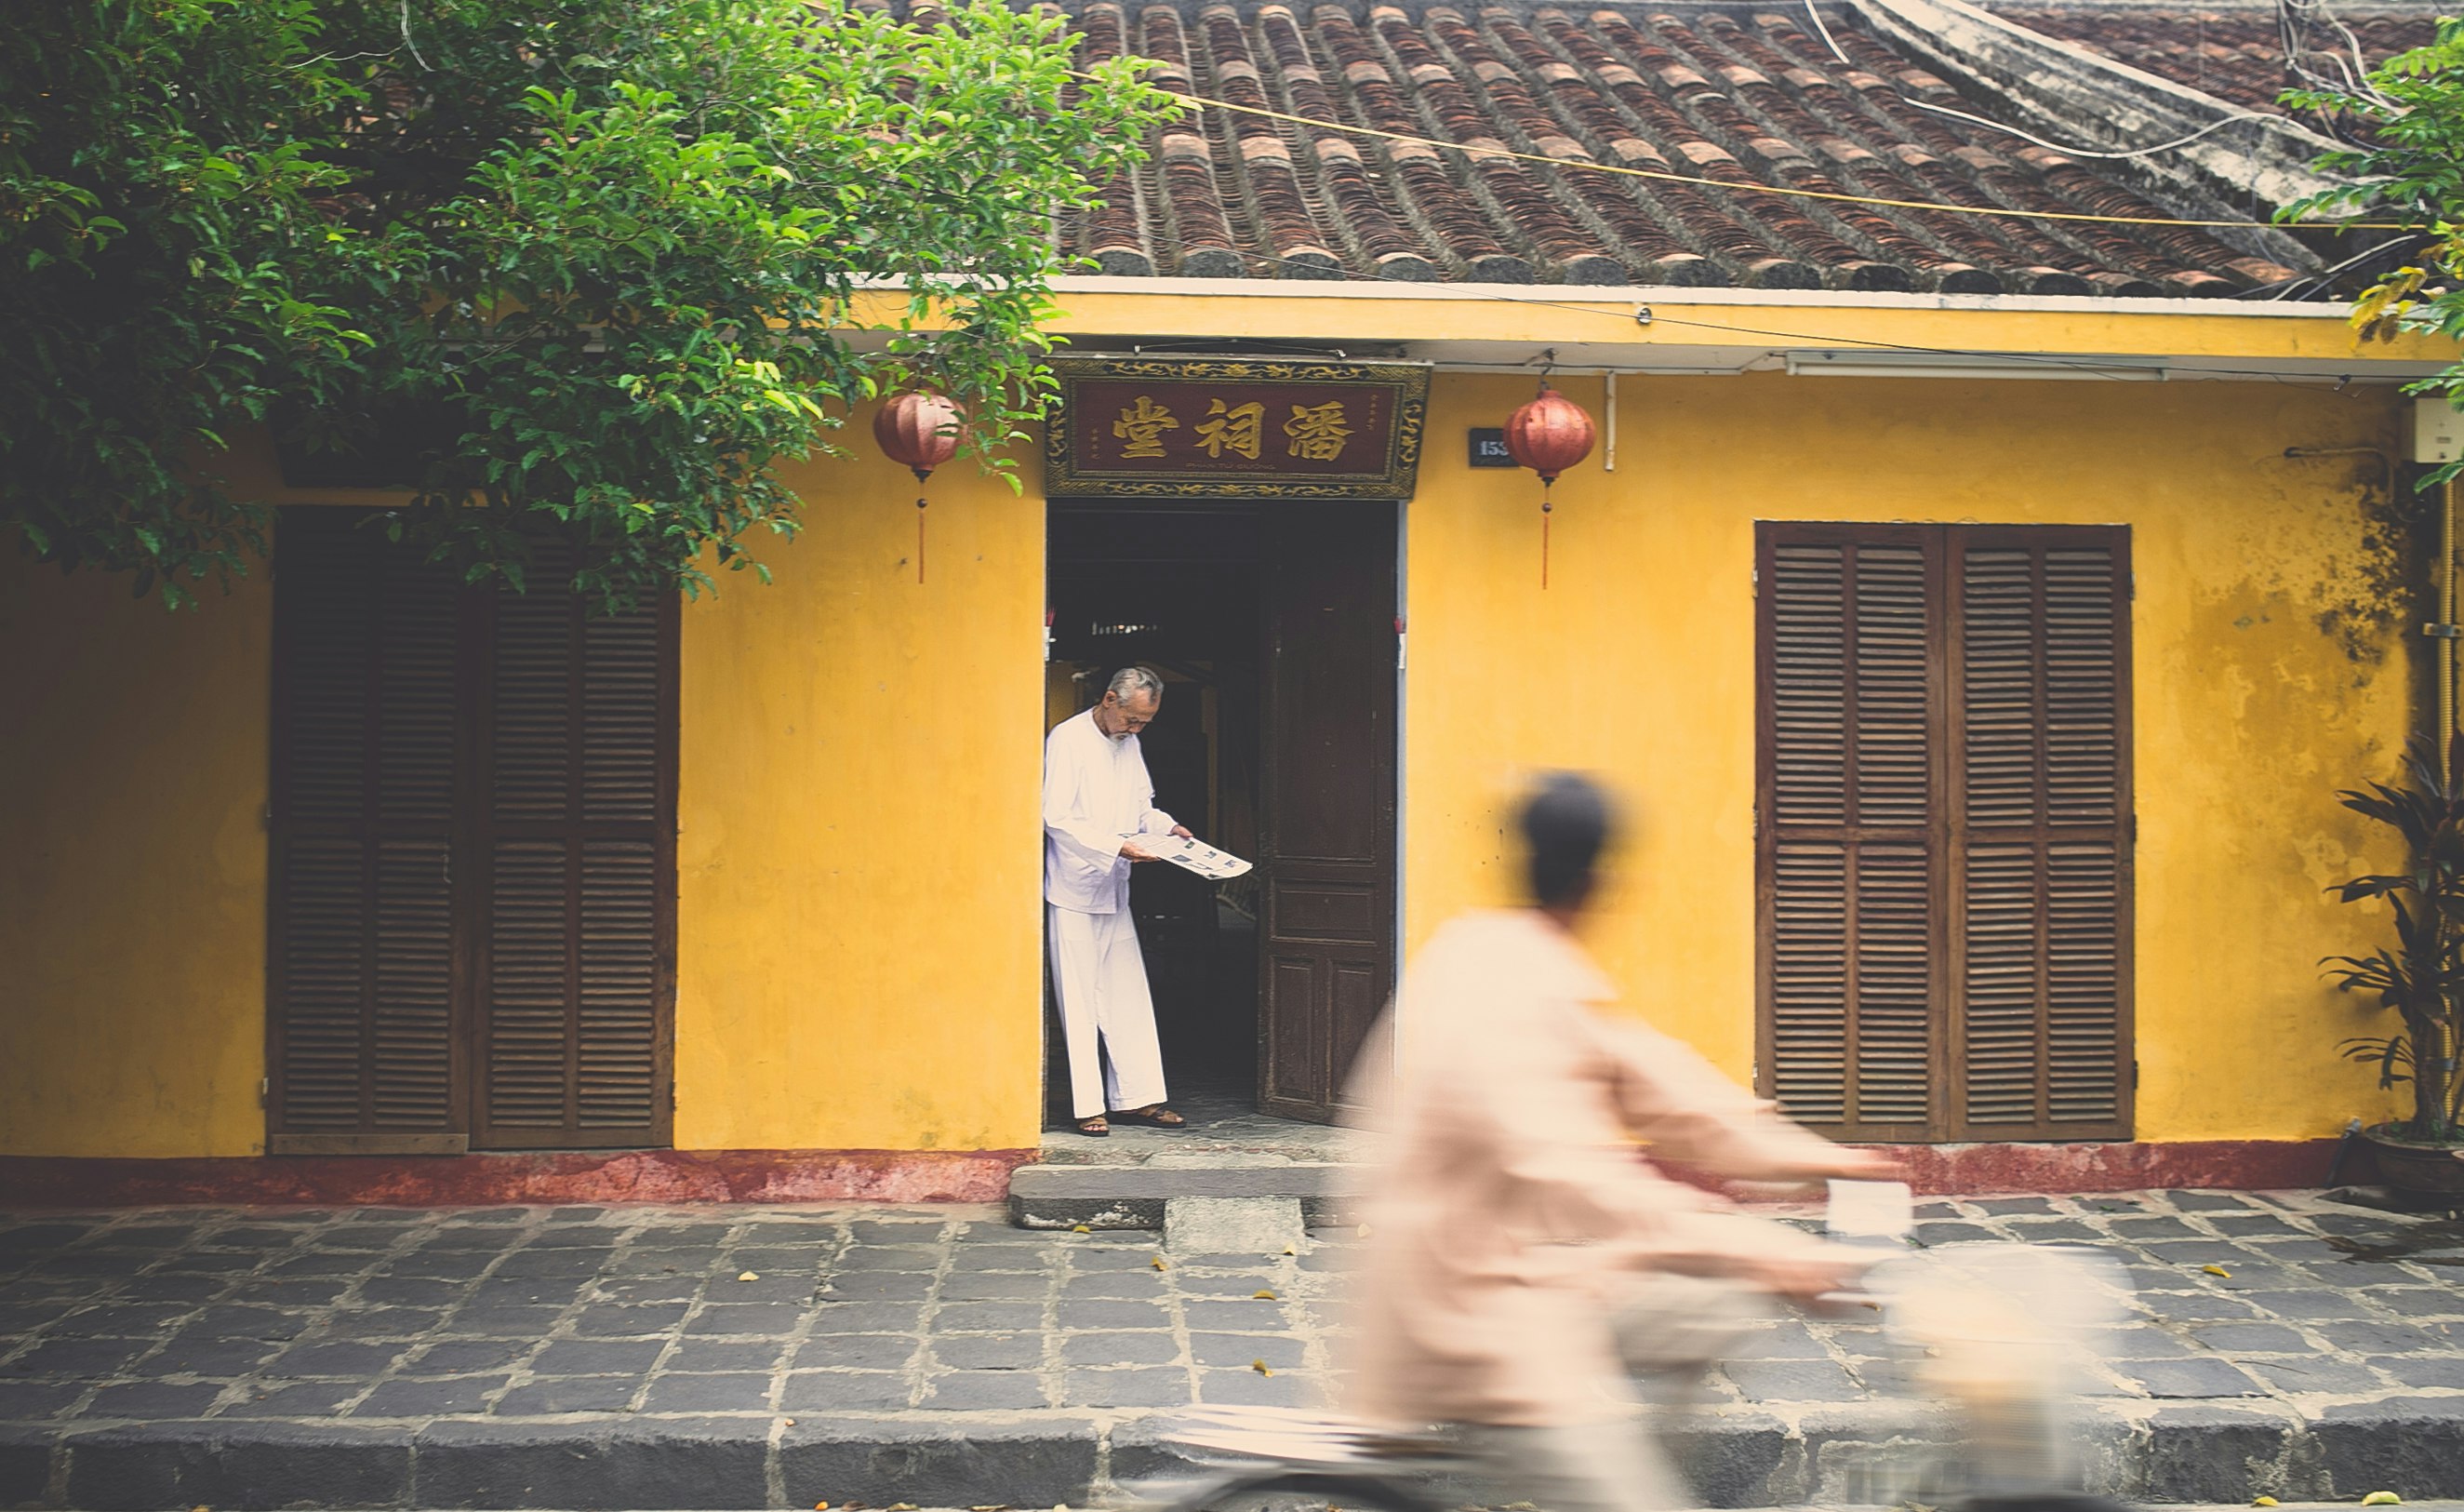 Asian house with a man in the door and another man on a bike driving by